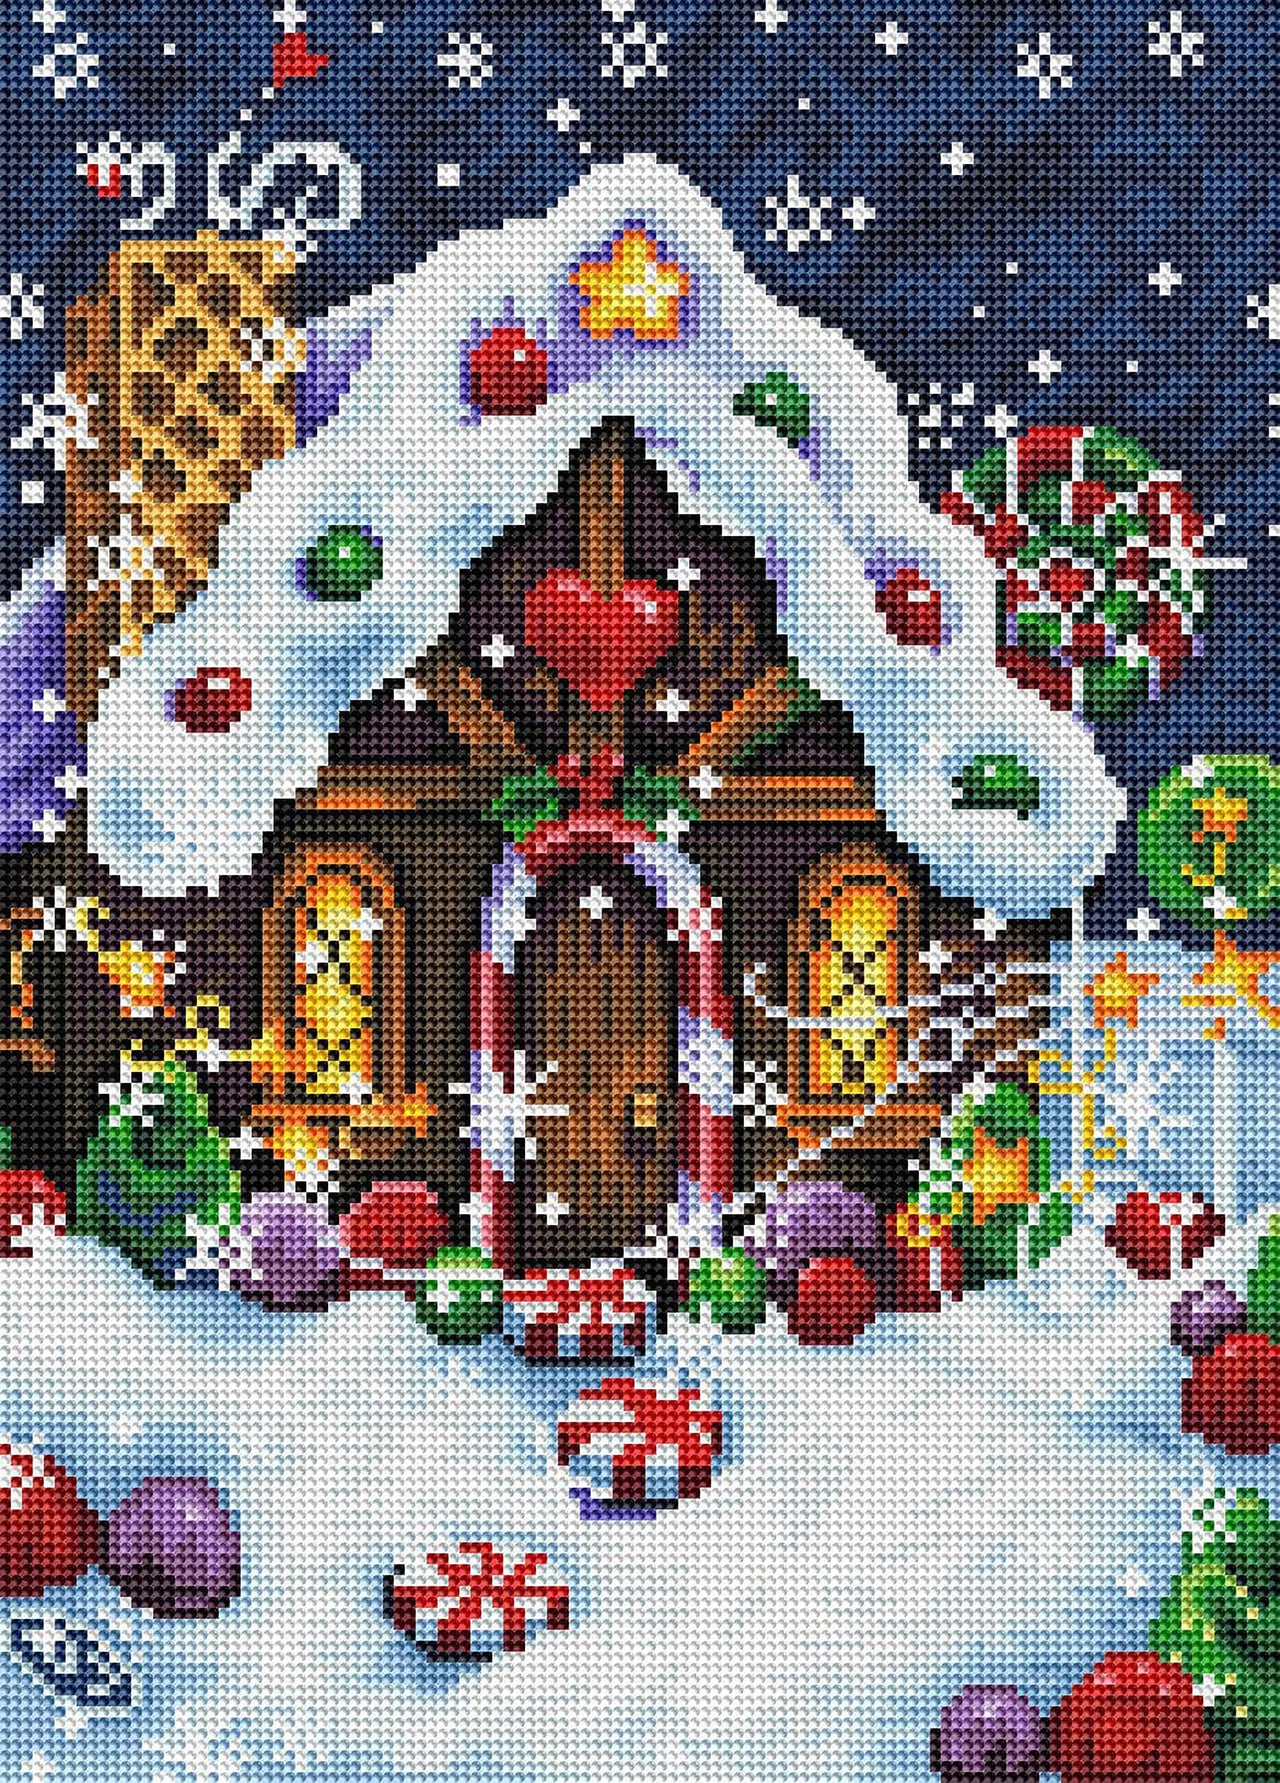 Diamond Painting Gingerbread House 13" x 18" (32.8cm x 45.7cm) / Round with 40 Colors including 4 ABs / 19,071